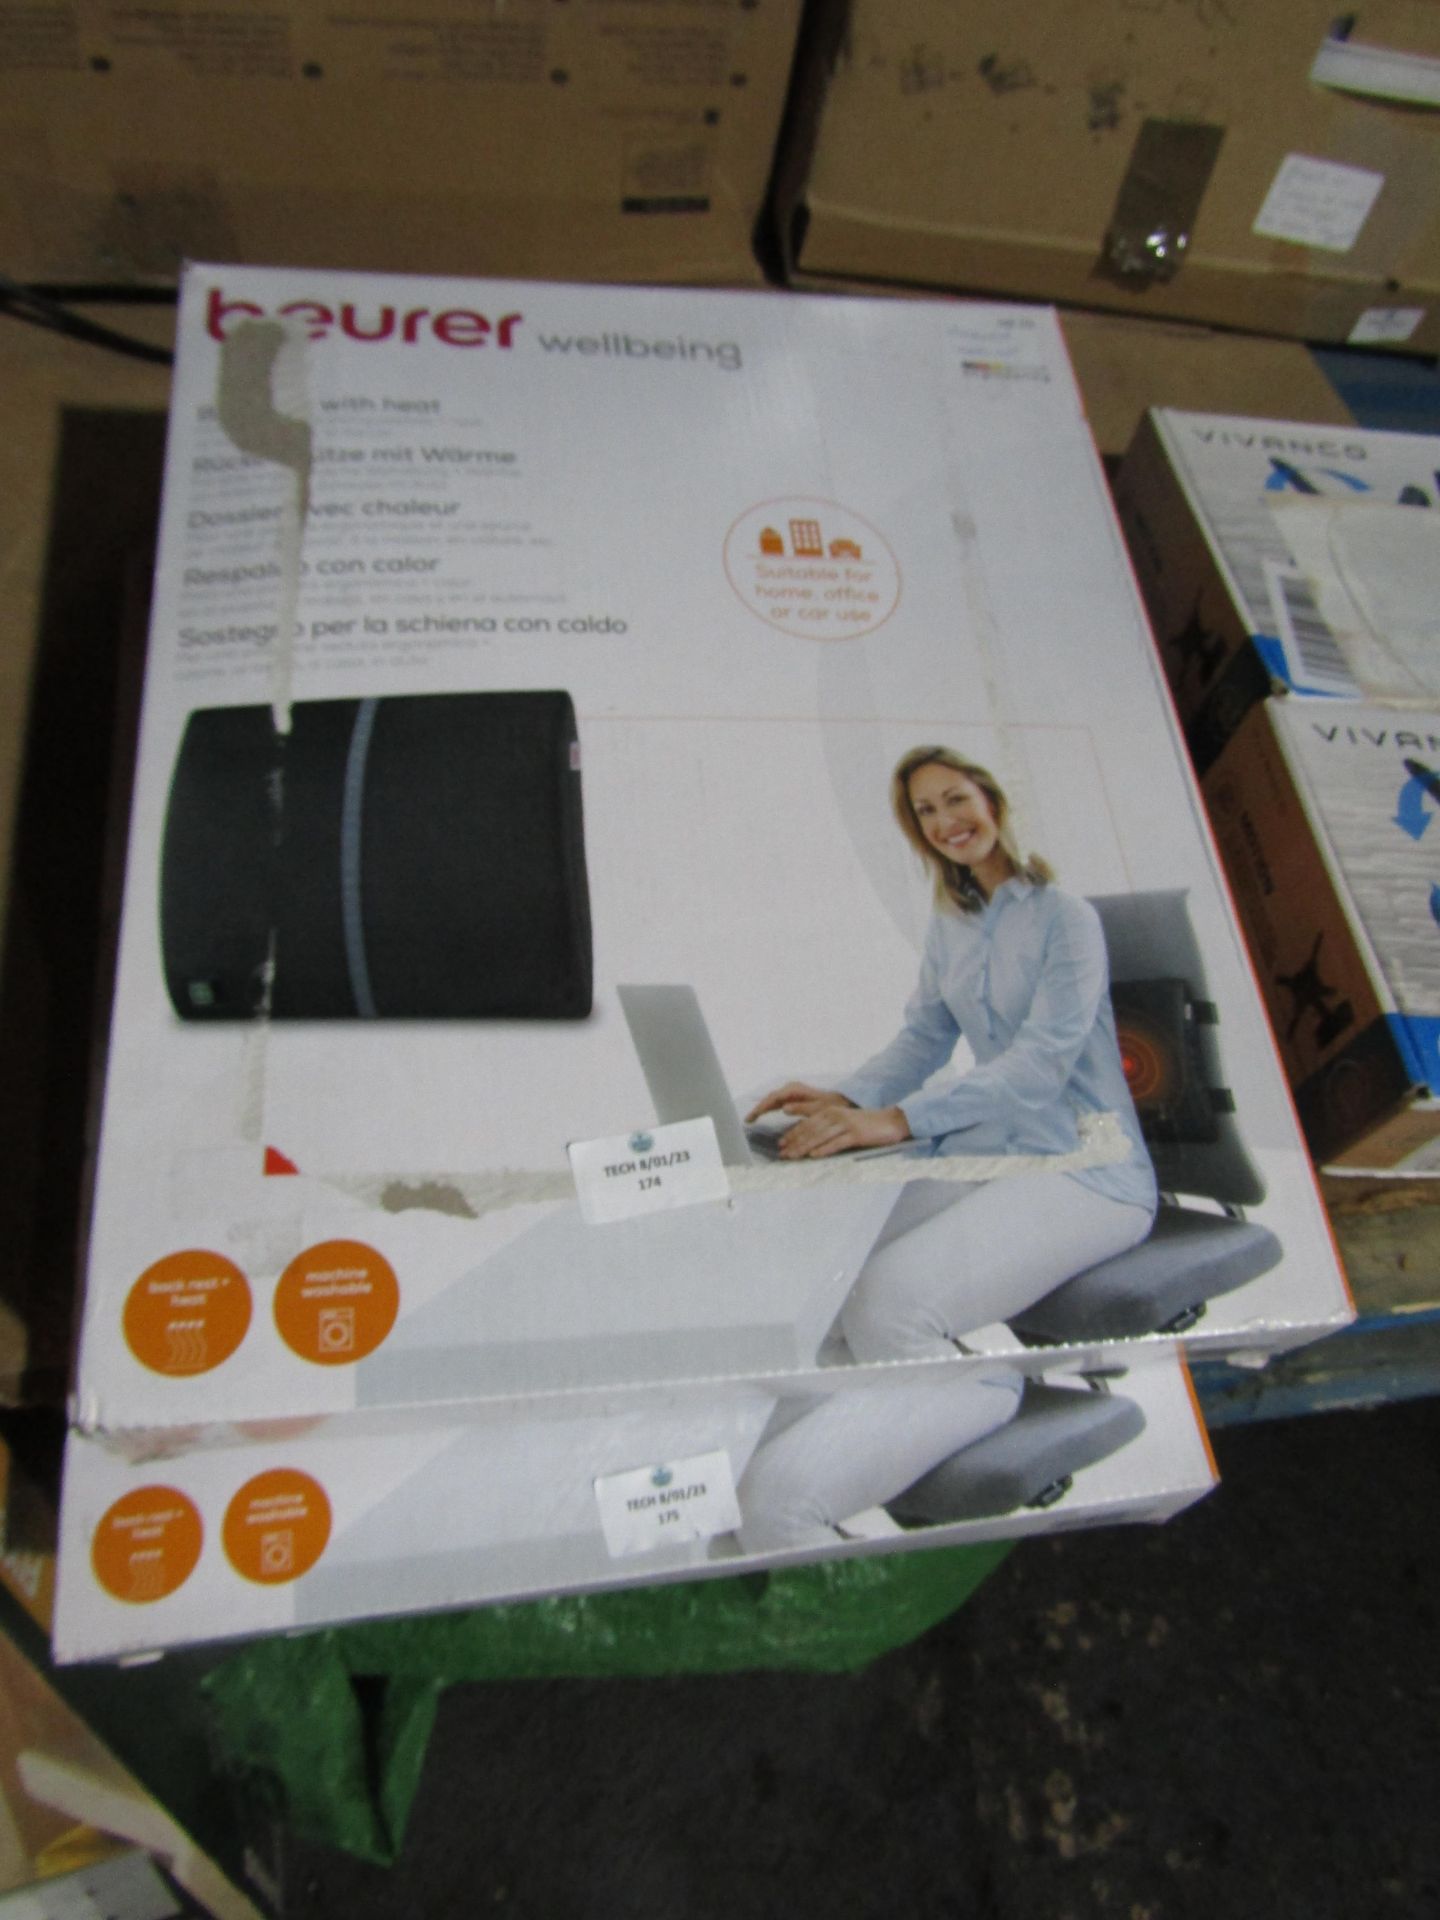 Beurer Wellbeing Back Rest with Heat packaged powers on heats up